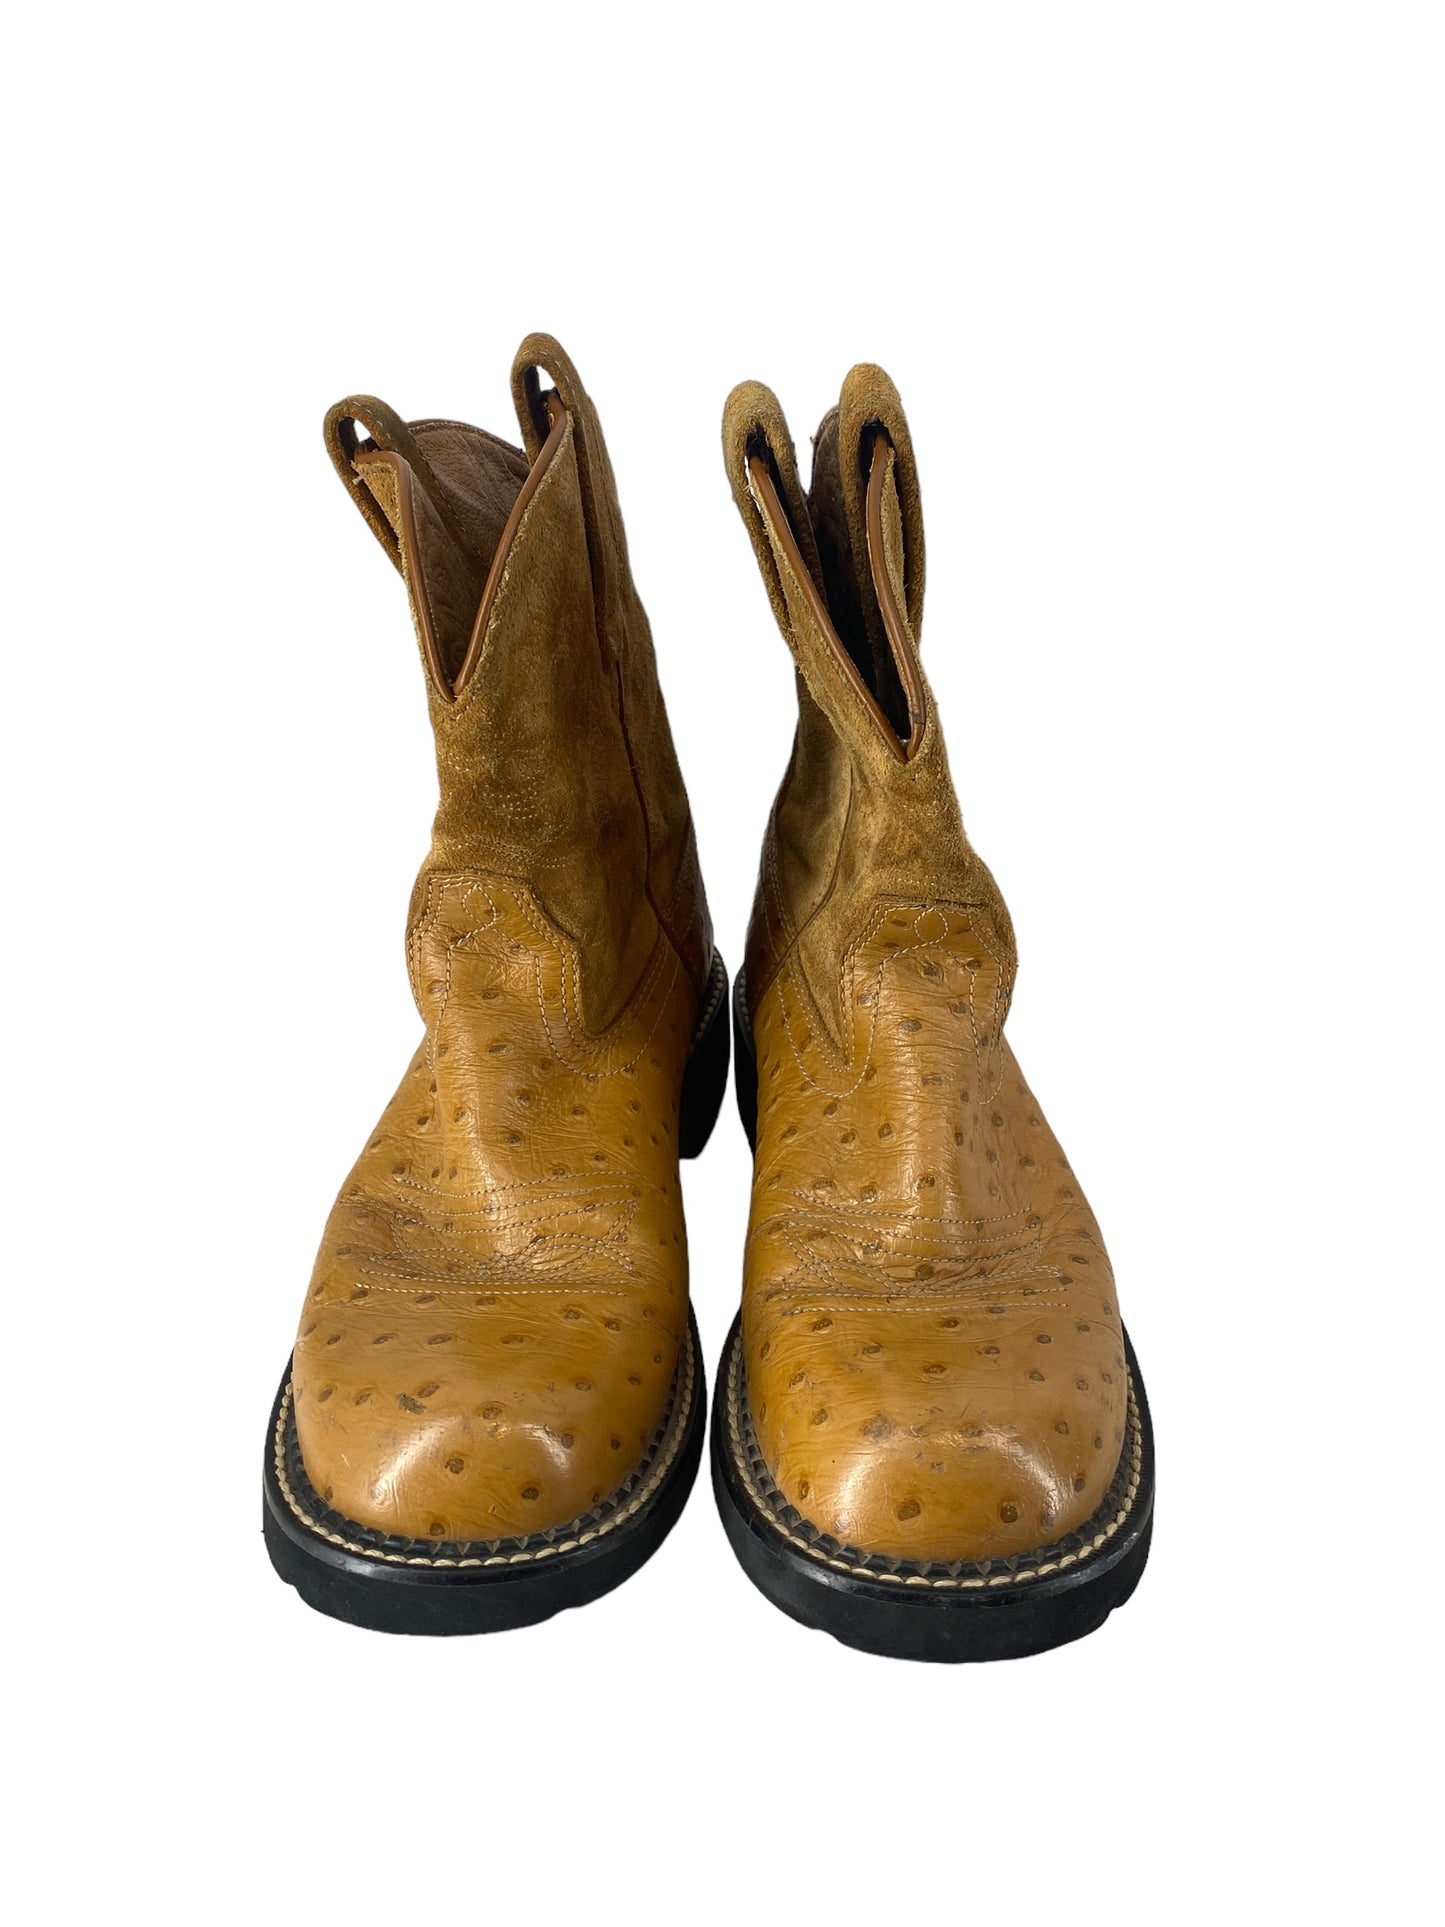 Boots Ankle Heels By Ariat  Size: 8.5